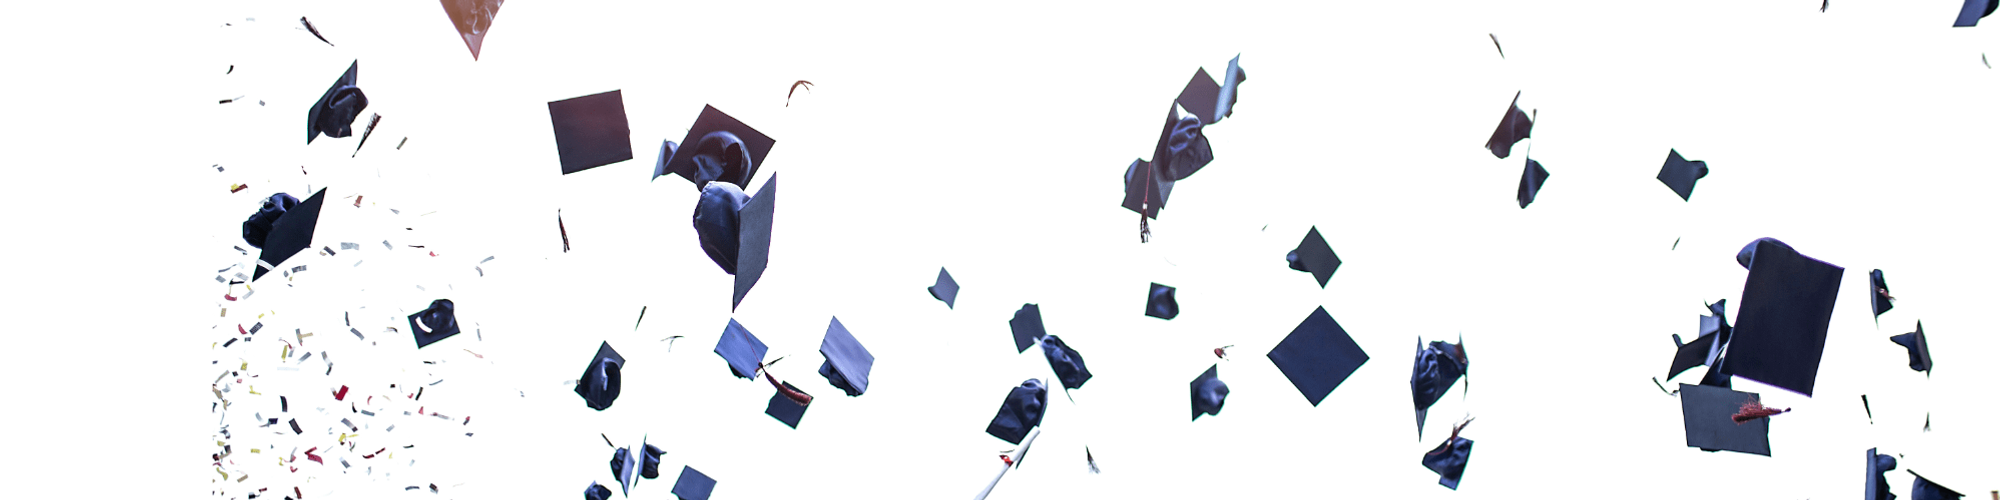 Lots of graduation mortarboards thrown in the air